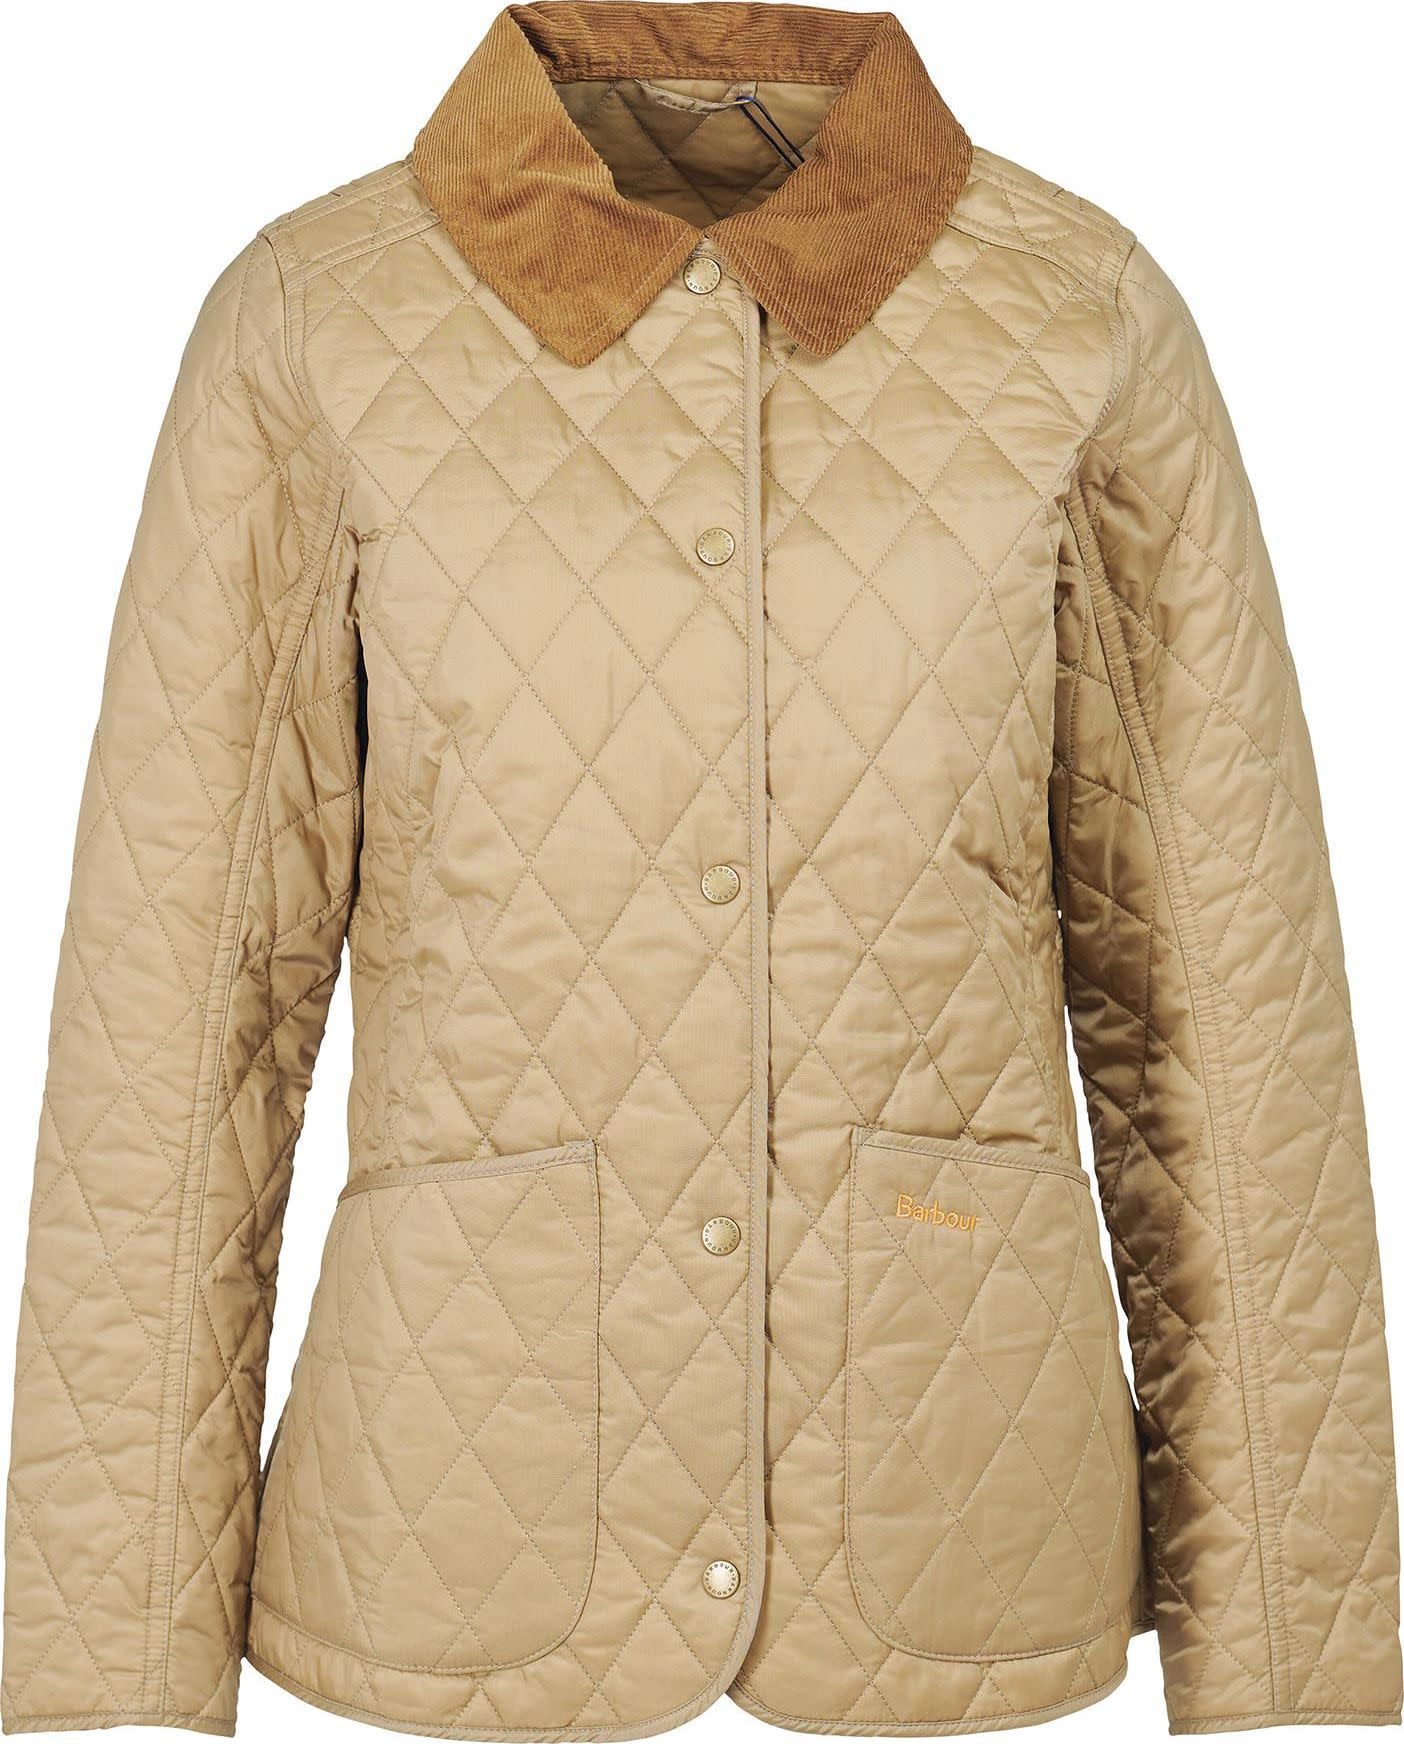 Barbour Women’s Annandale Quilted Jacket Trench